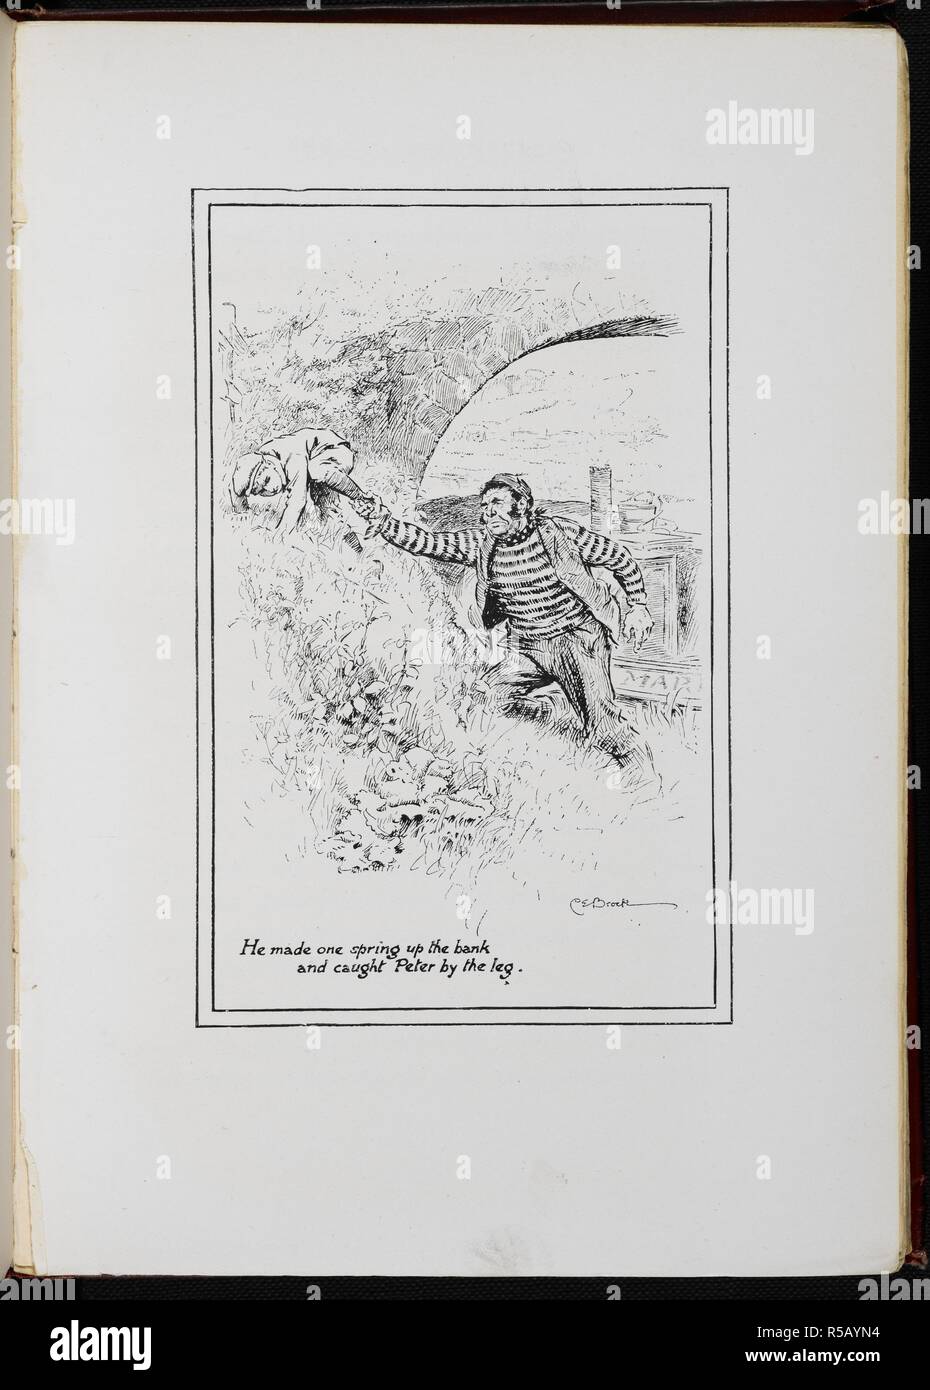 'He made a spring up the bank, and caught Peter'. The Railway Children With drawings by C E Brock. London : Wells Gardner & Co., 1906. Source: 12813.y.7 page 166. Language: English. Author: Brock, Charles Edmund. Nesbit, afterwards Bland, Edith. Stock Photo